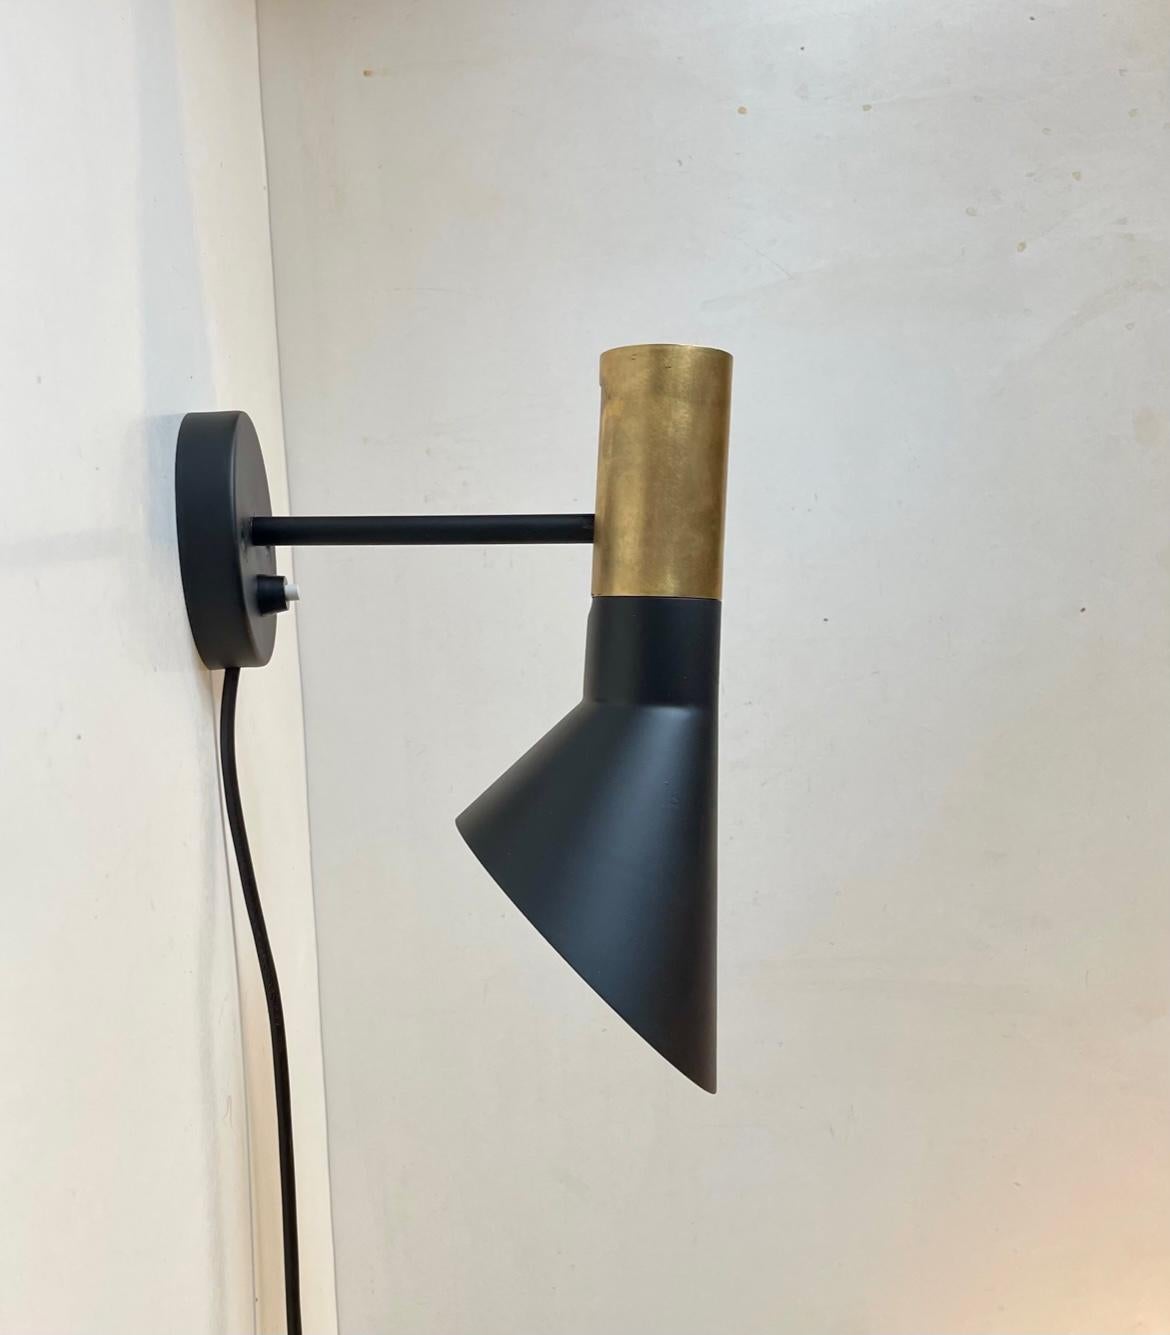 A rare version of the AJ visor Wall lamp. Designed by Arne Jacobsen in 1960 for Royal SAS Hotel in Copenhagen. This particular example features an exposed brass top. Only the first series were partially made from brass. The shade adjust up or